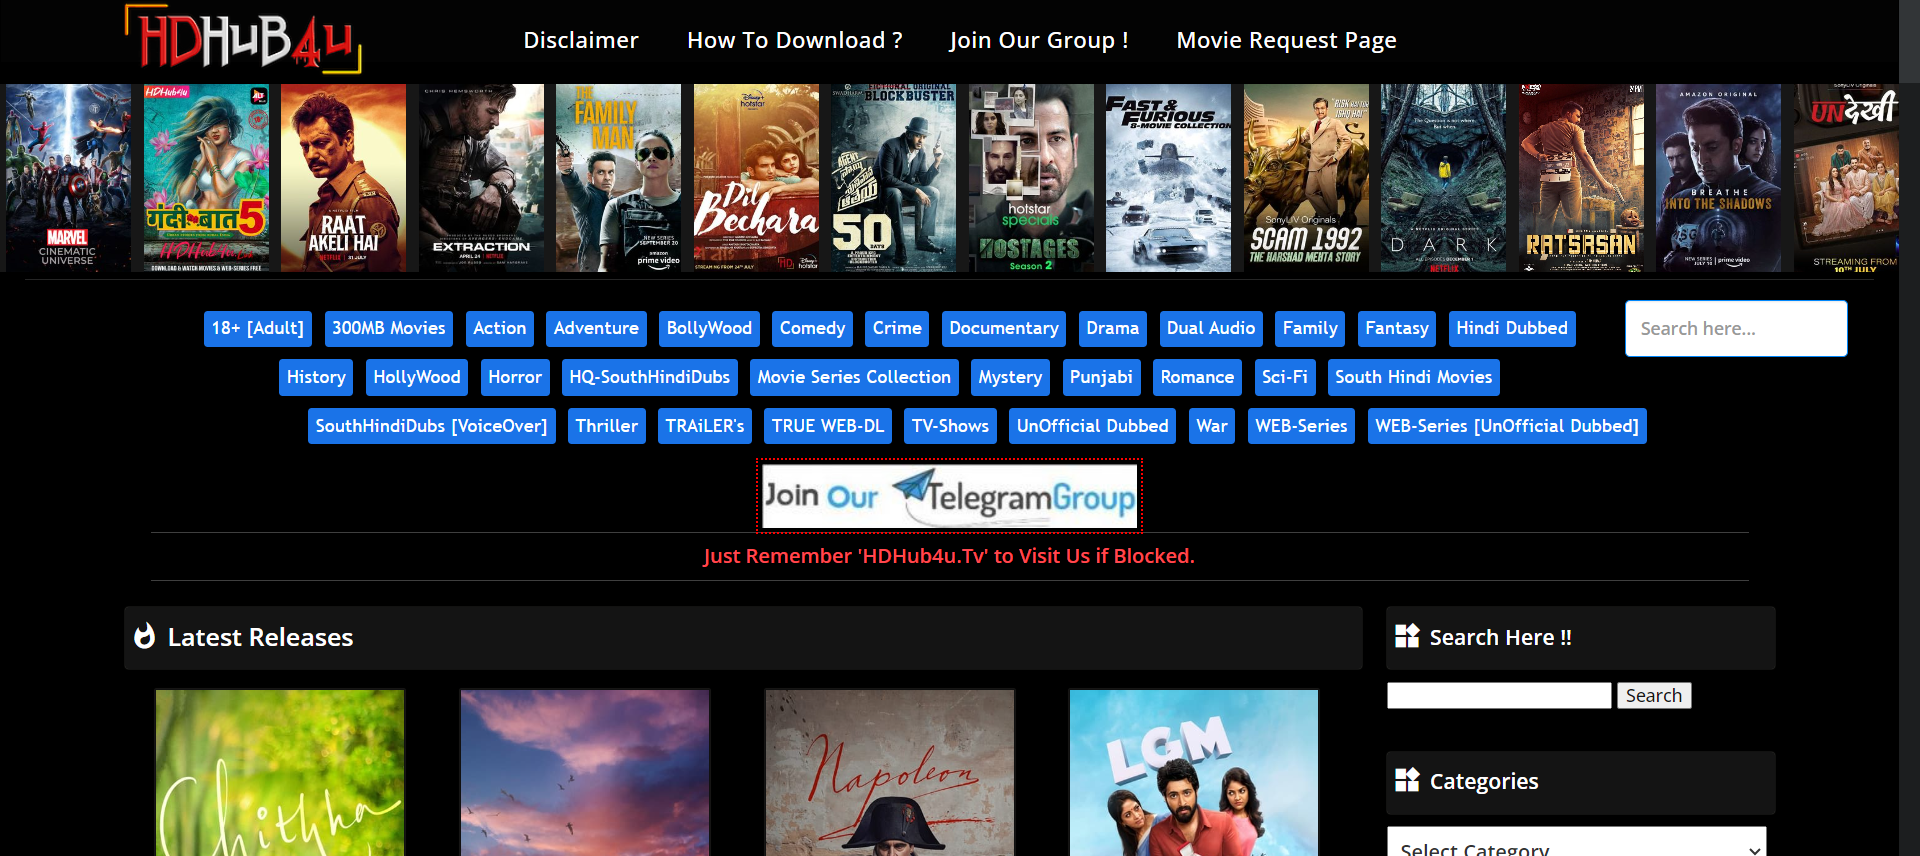 HDhub4u: Download Your Favorite Movies, Web Series, and 18+ Content in 300MB